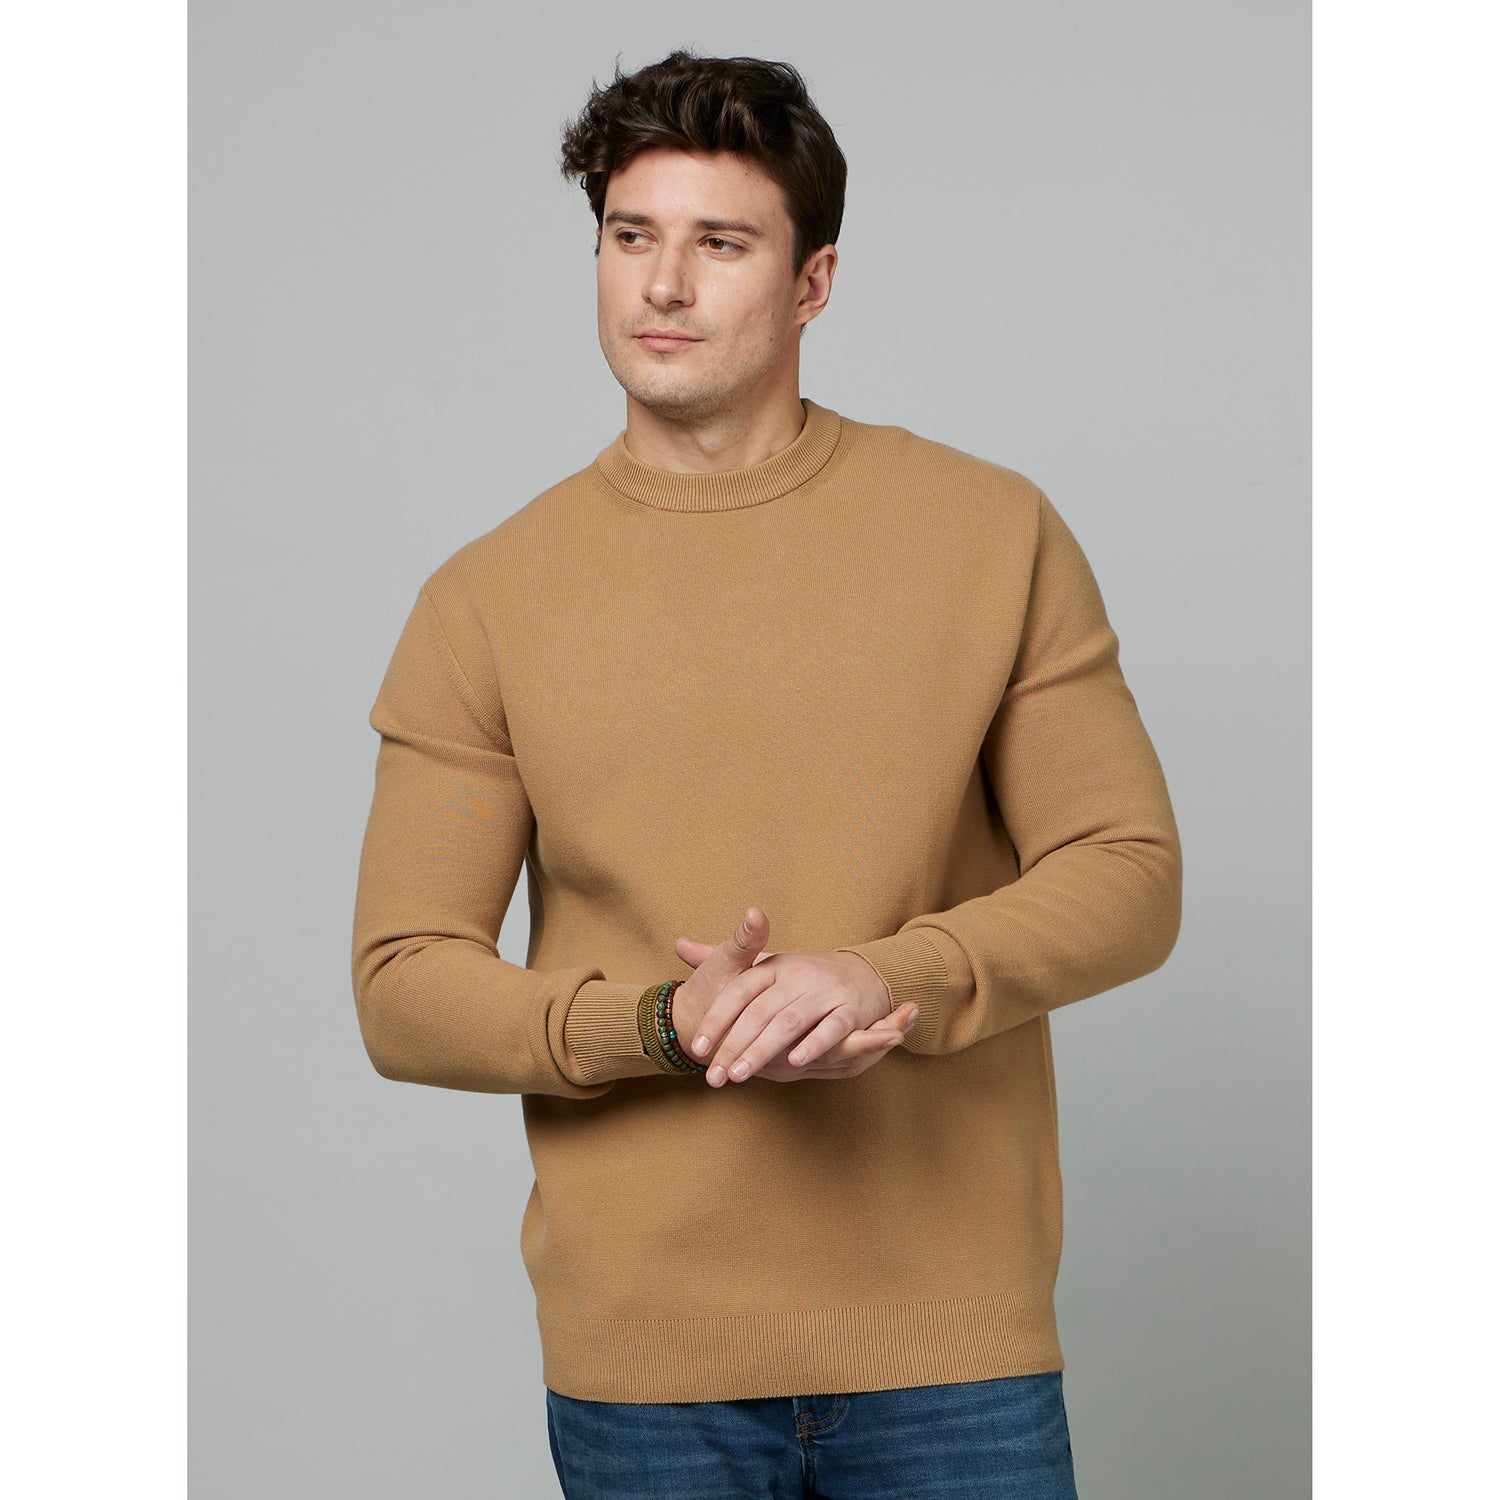 Light Brown Round Neck Full Sleeves Cotton Pullover Sweater (BECLO)